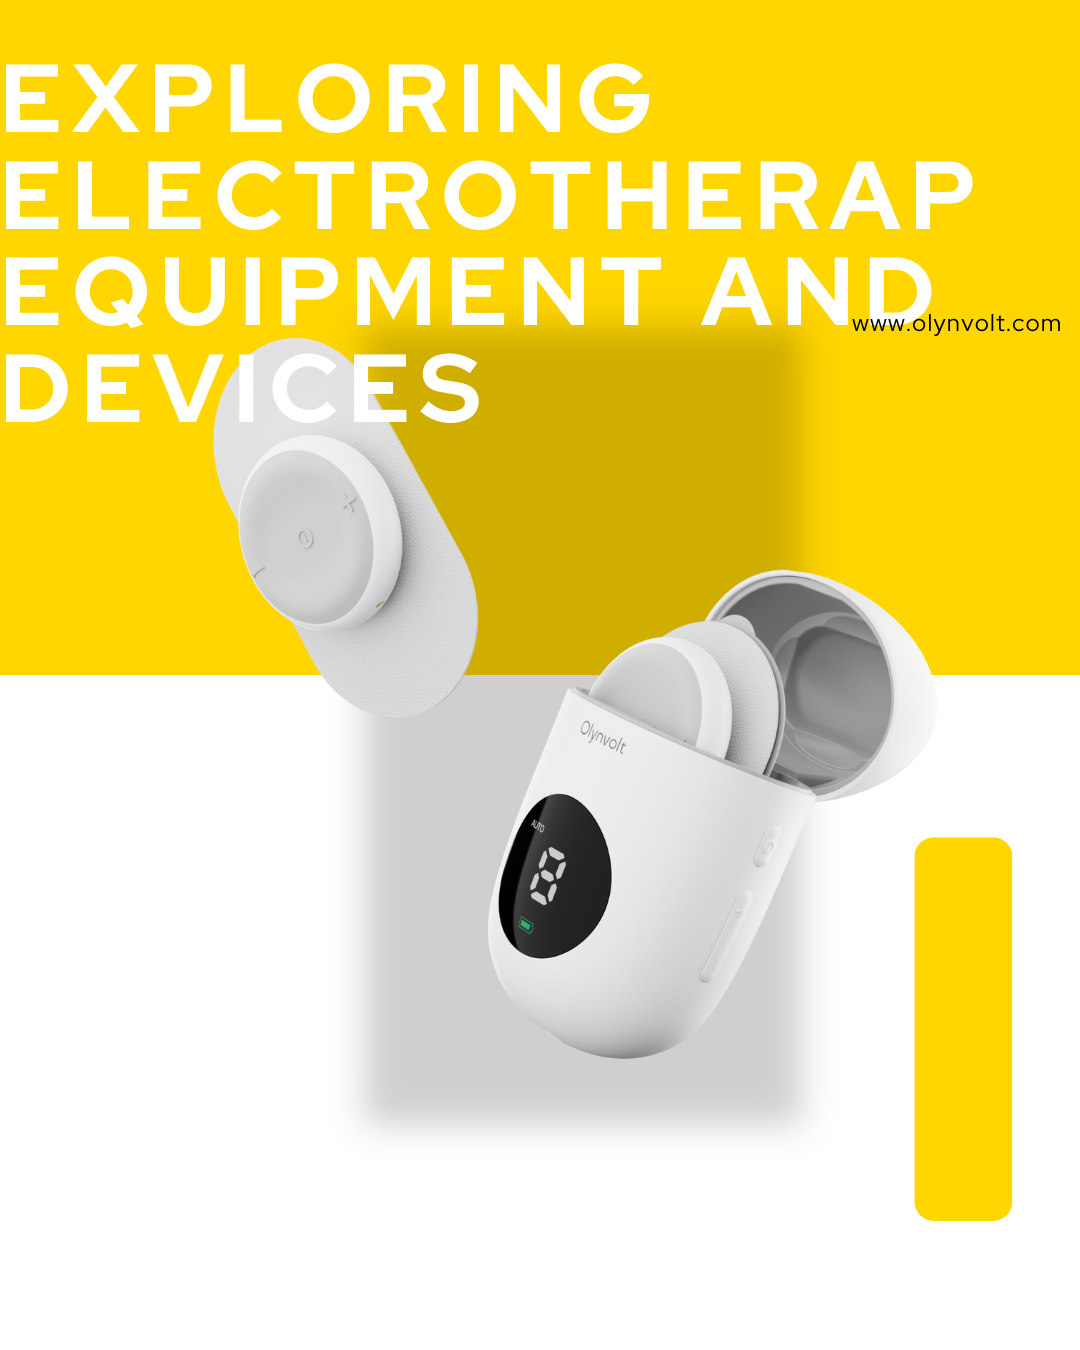 Exploring Electrotherapy Equipment and Devices